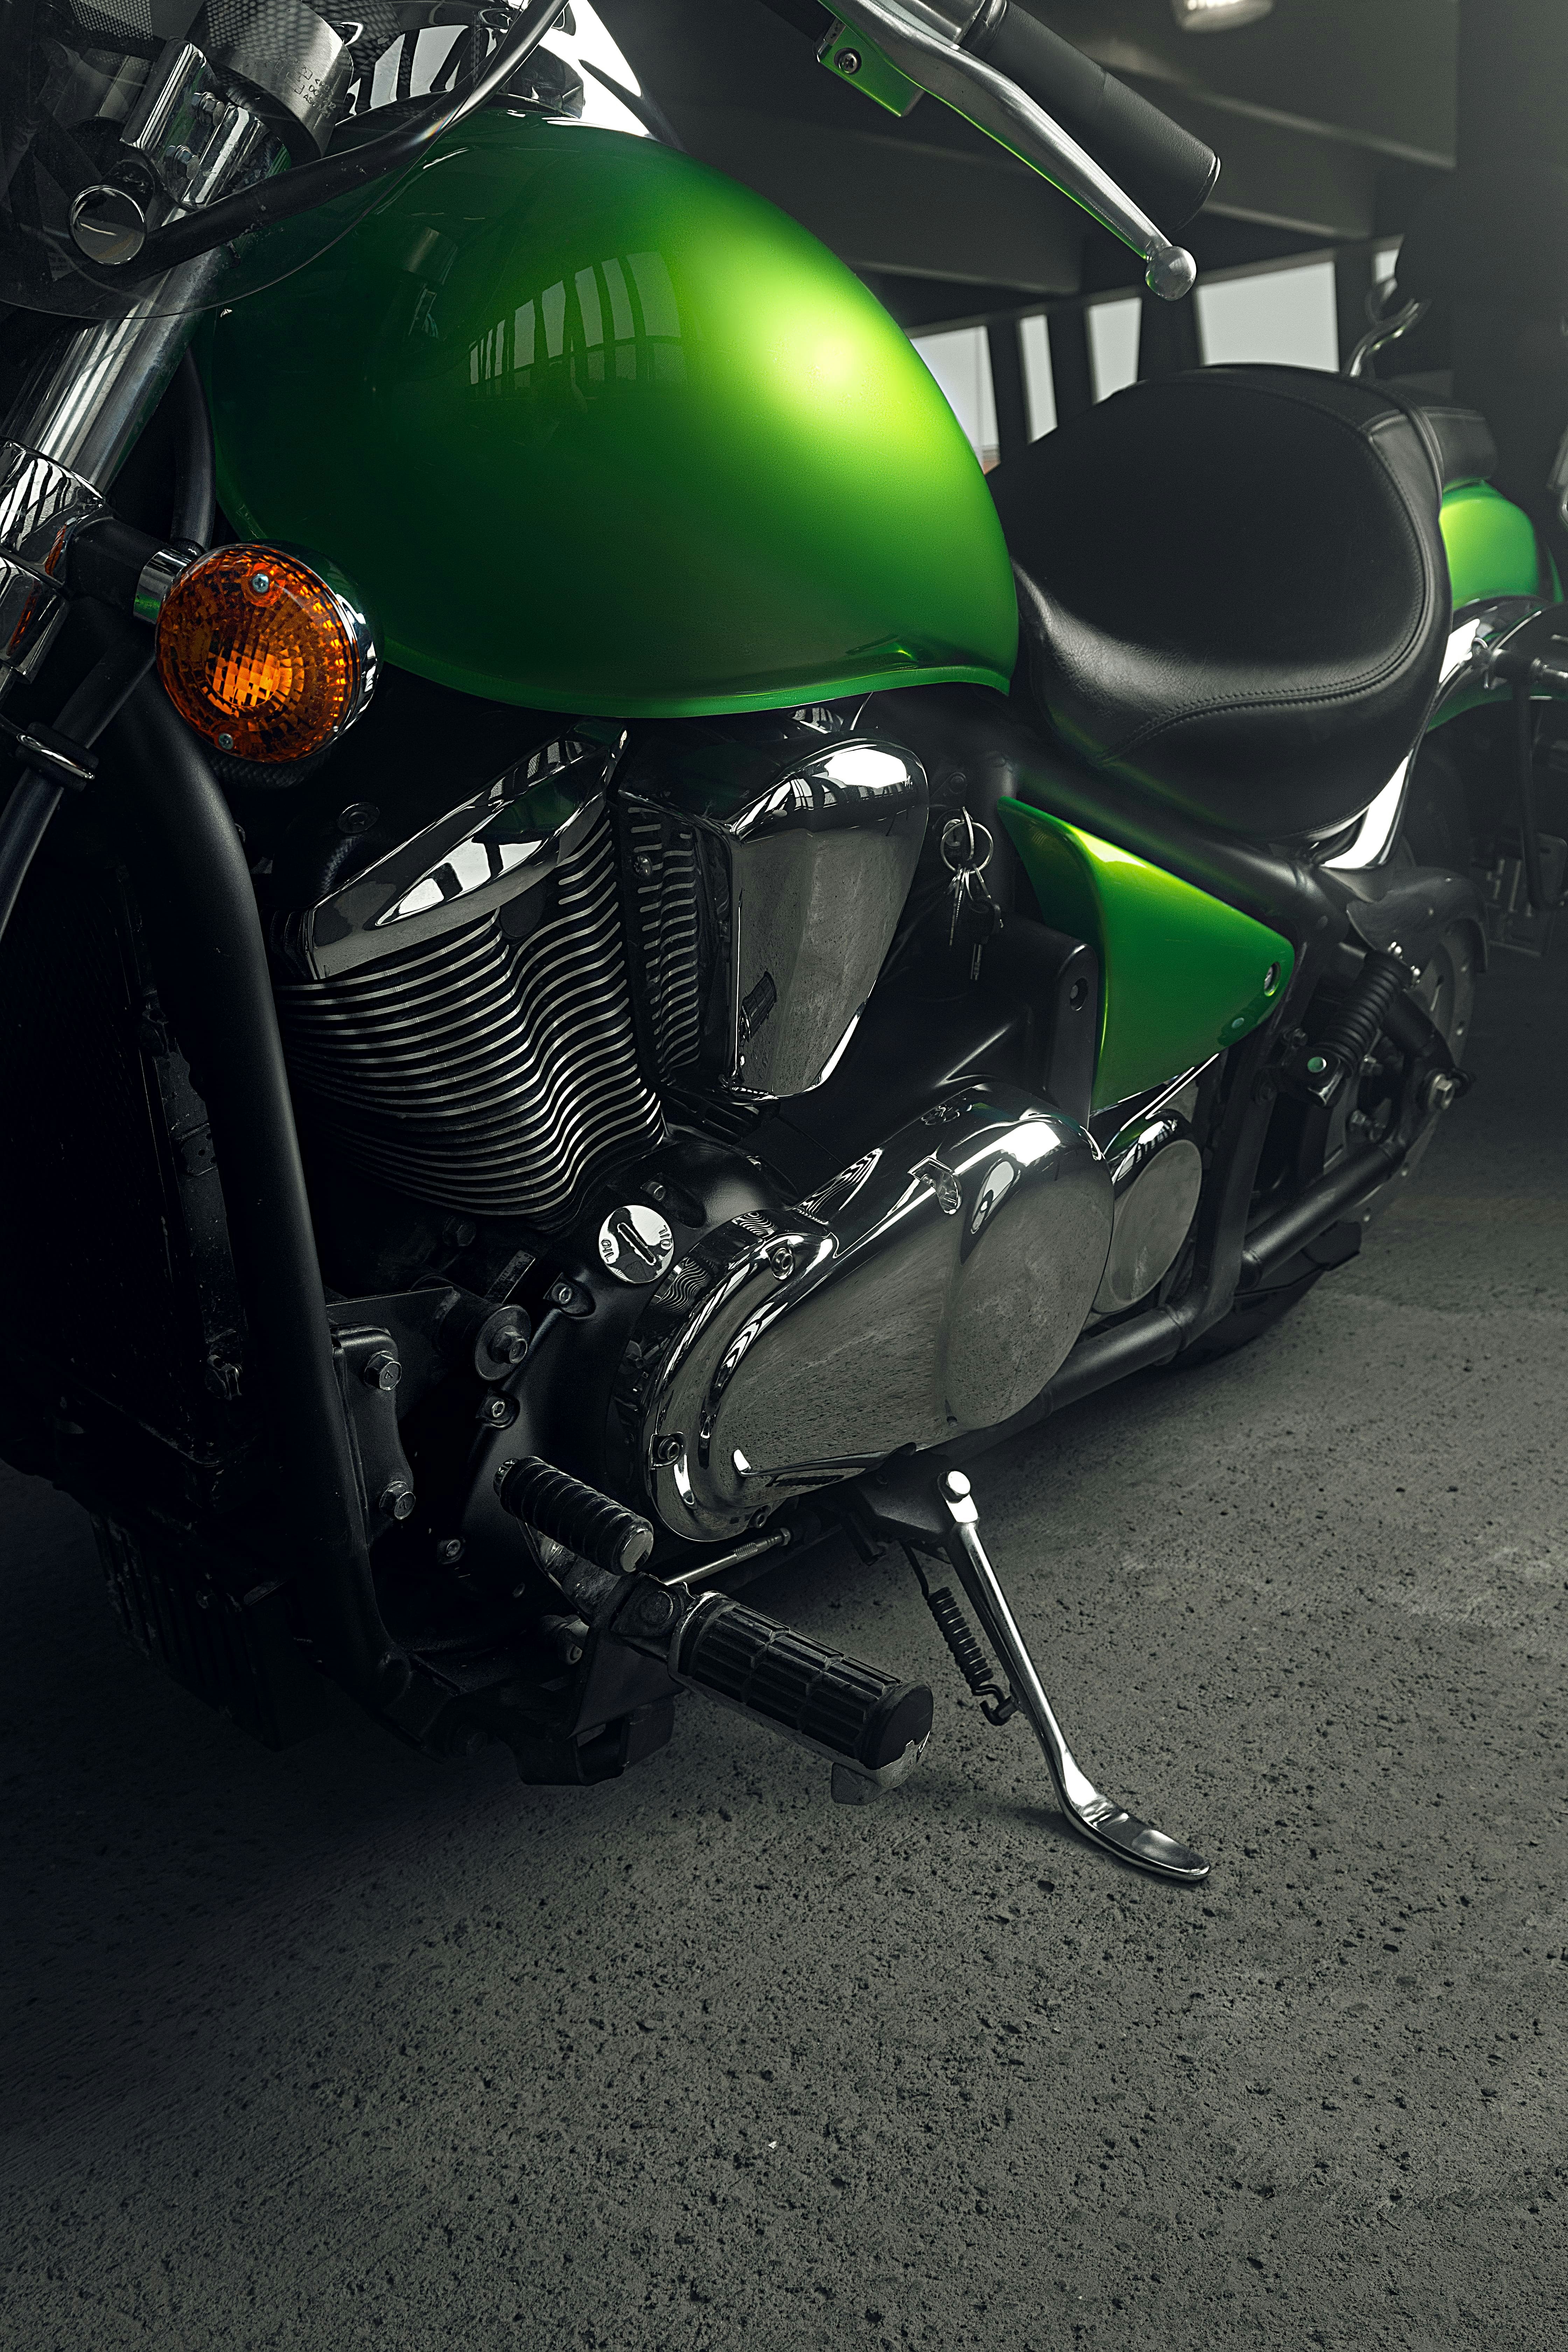 green and black motorcycle on gray concrete floor